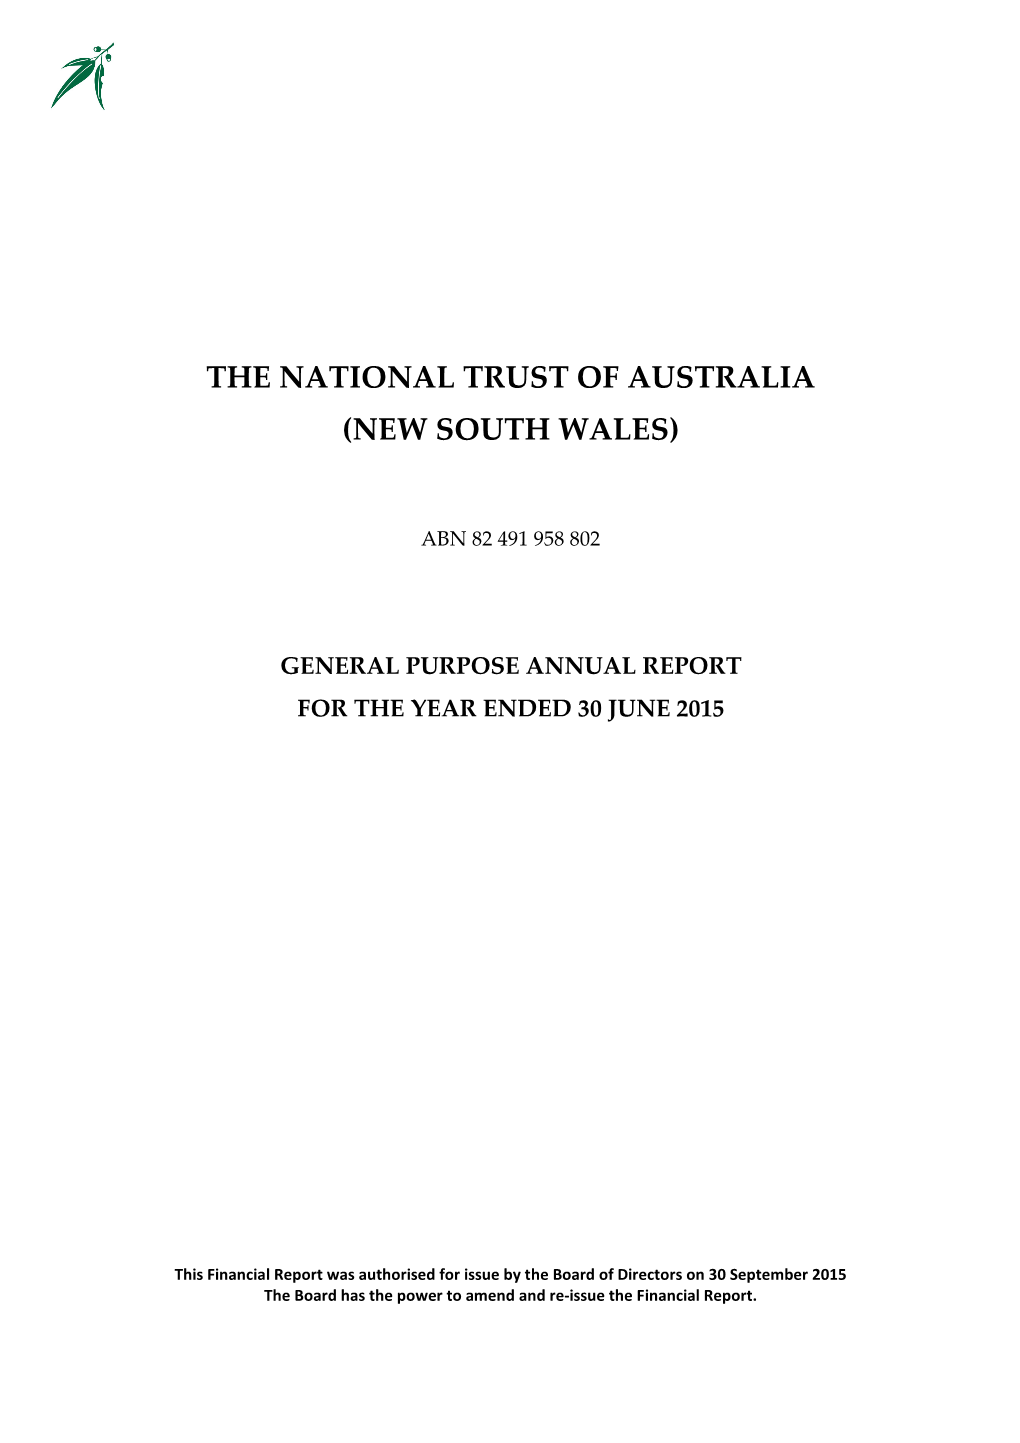 The National Trust of Australia (New South Wales)